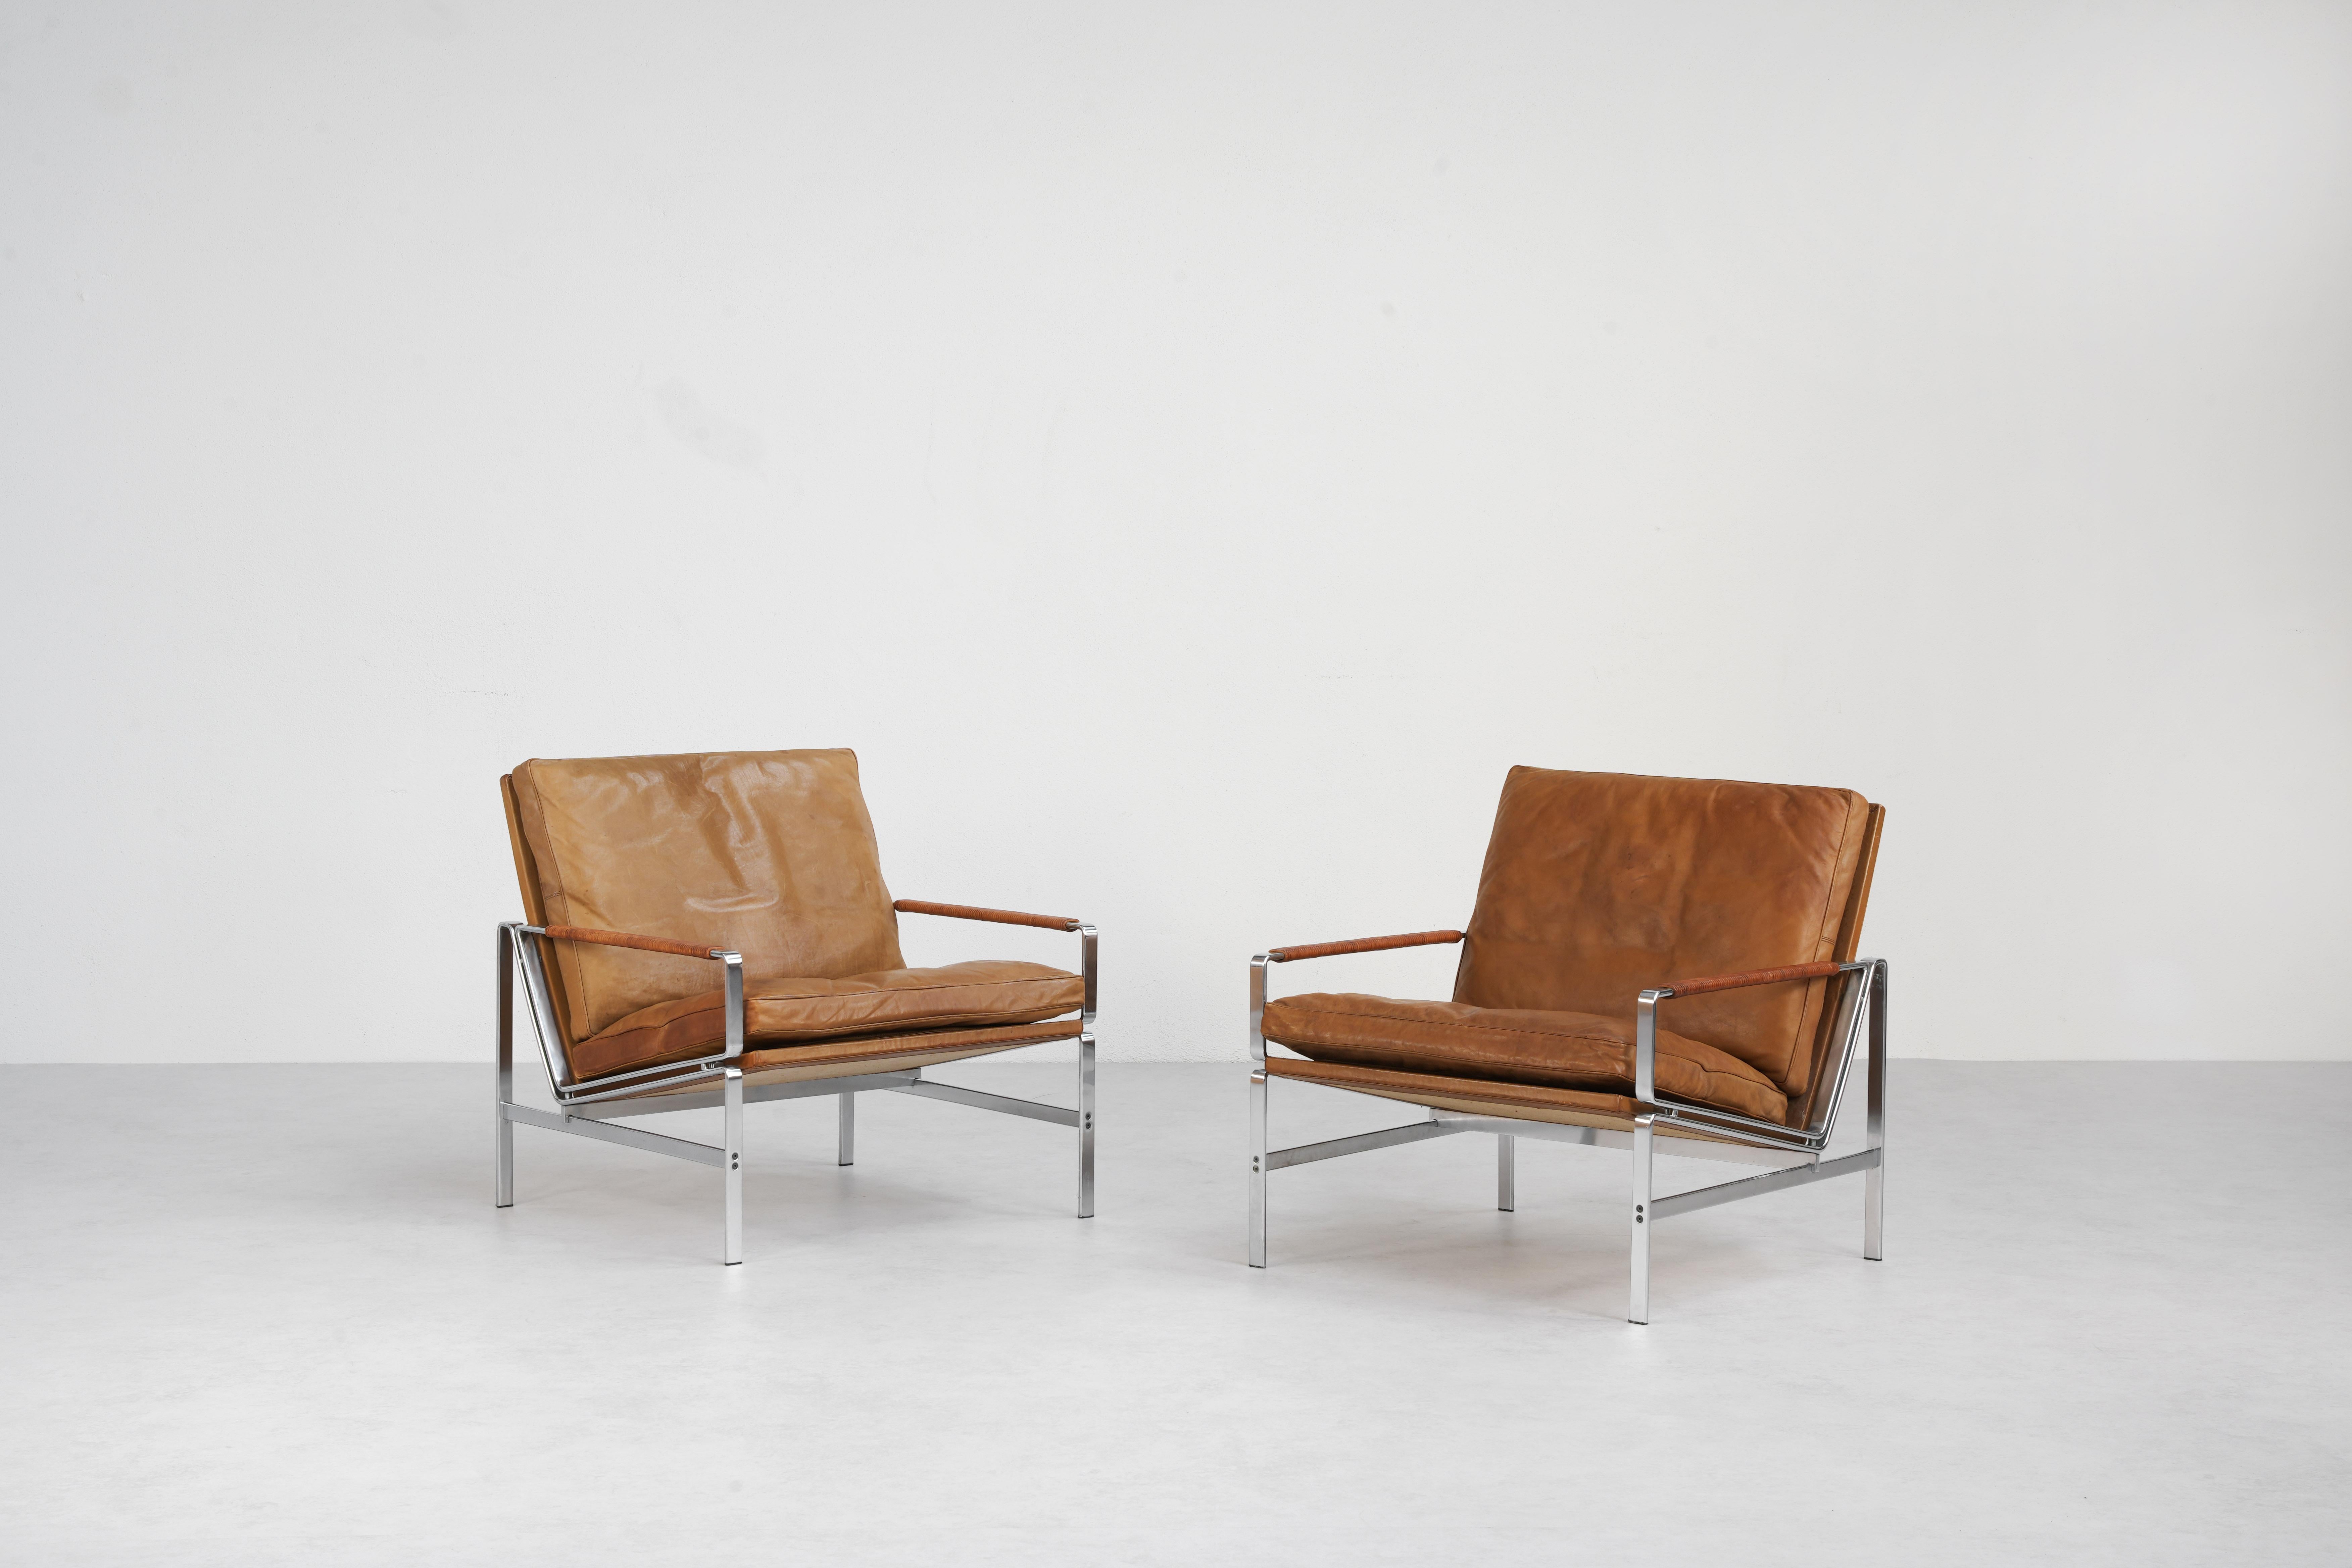 A beautiful pair of lounge chairs designed by Preben Fabricius & Jørgen Kastholm and produced by Alfred Kill International, Germany 1968. 
Designed with mid-century modern elegance, these chairs effortlessly combine form and function. Both chairs